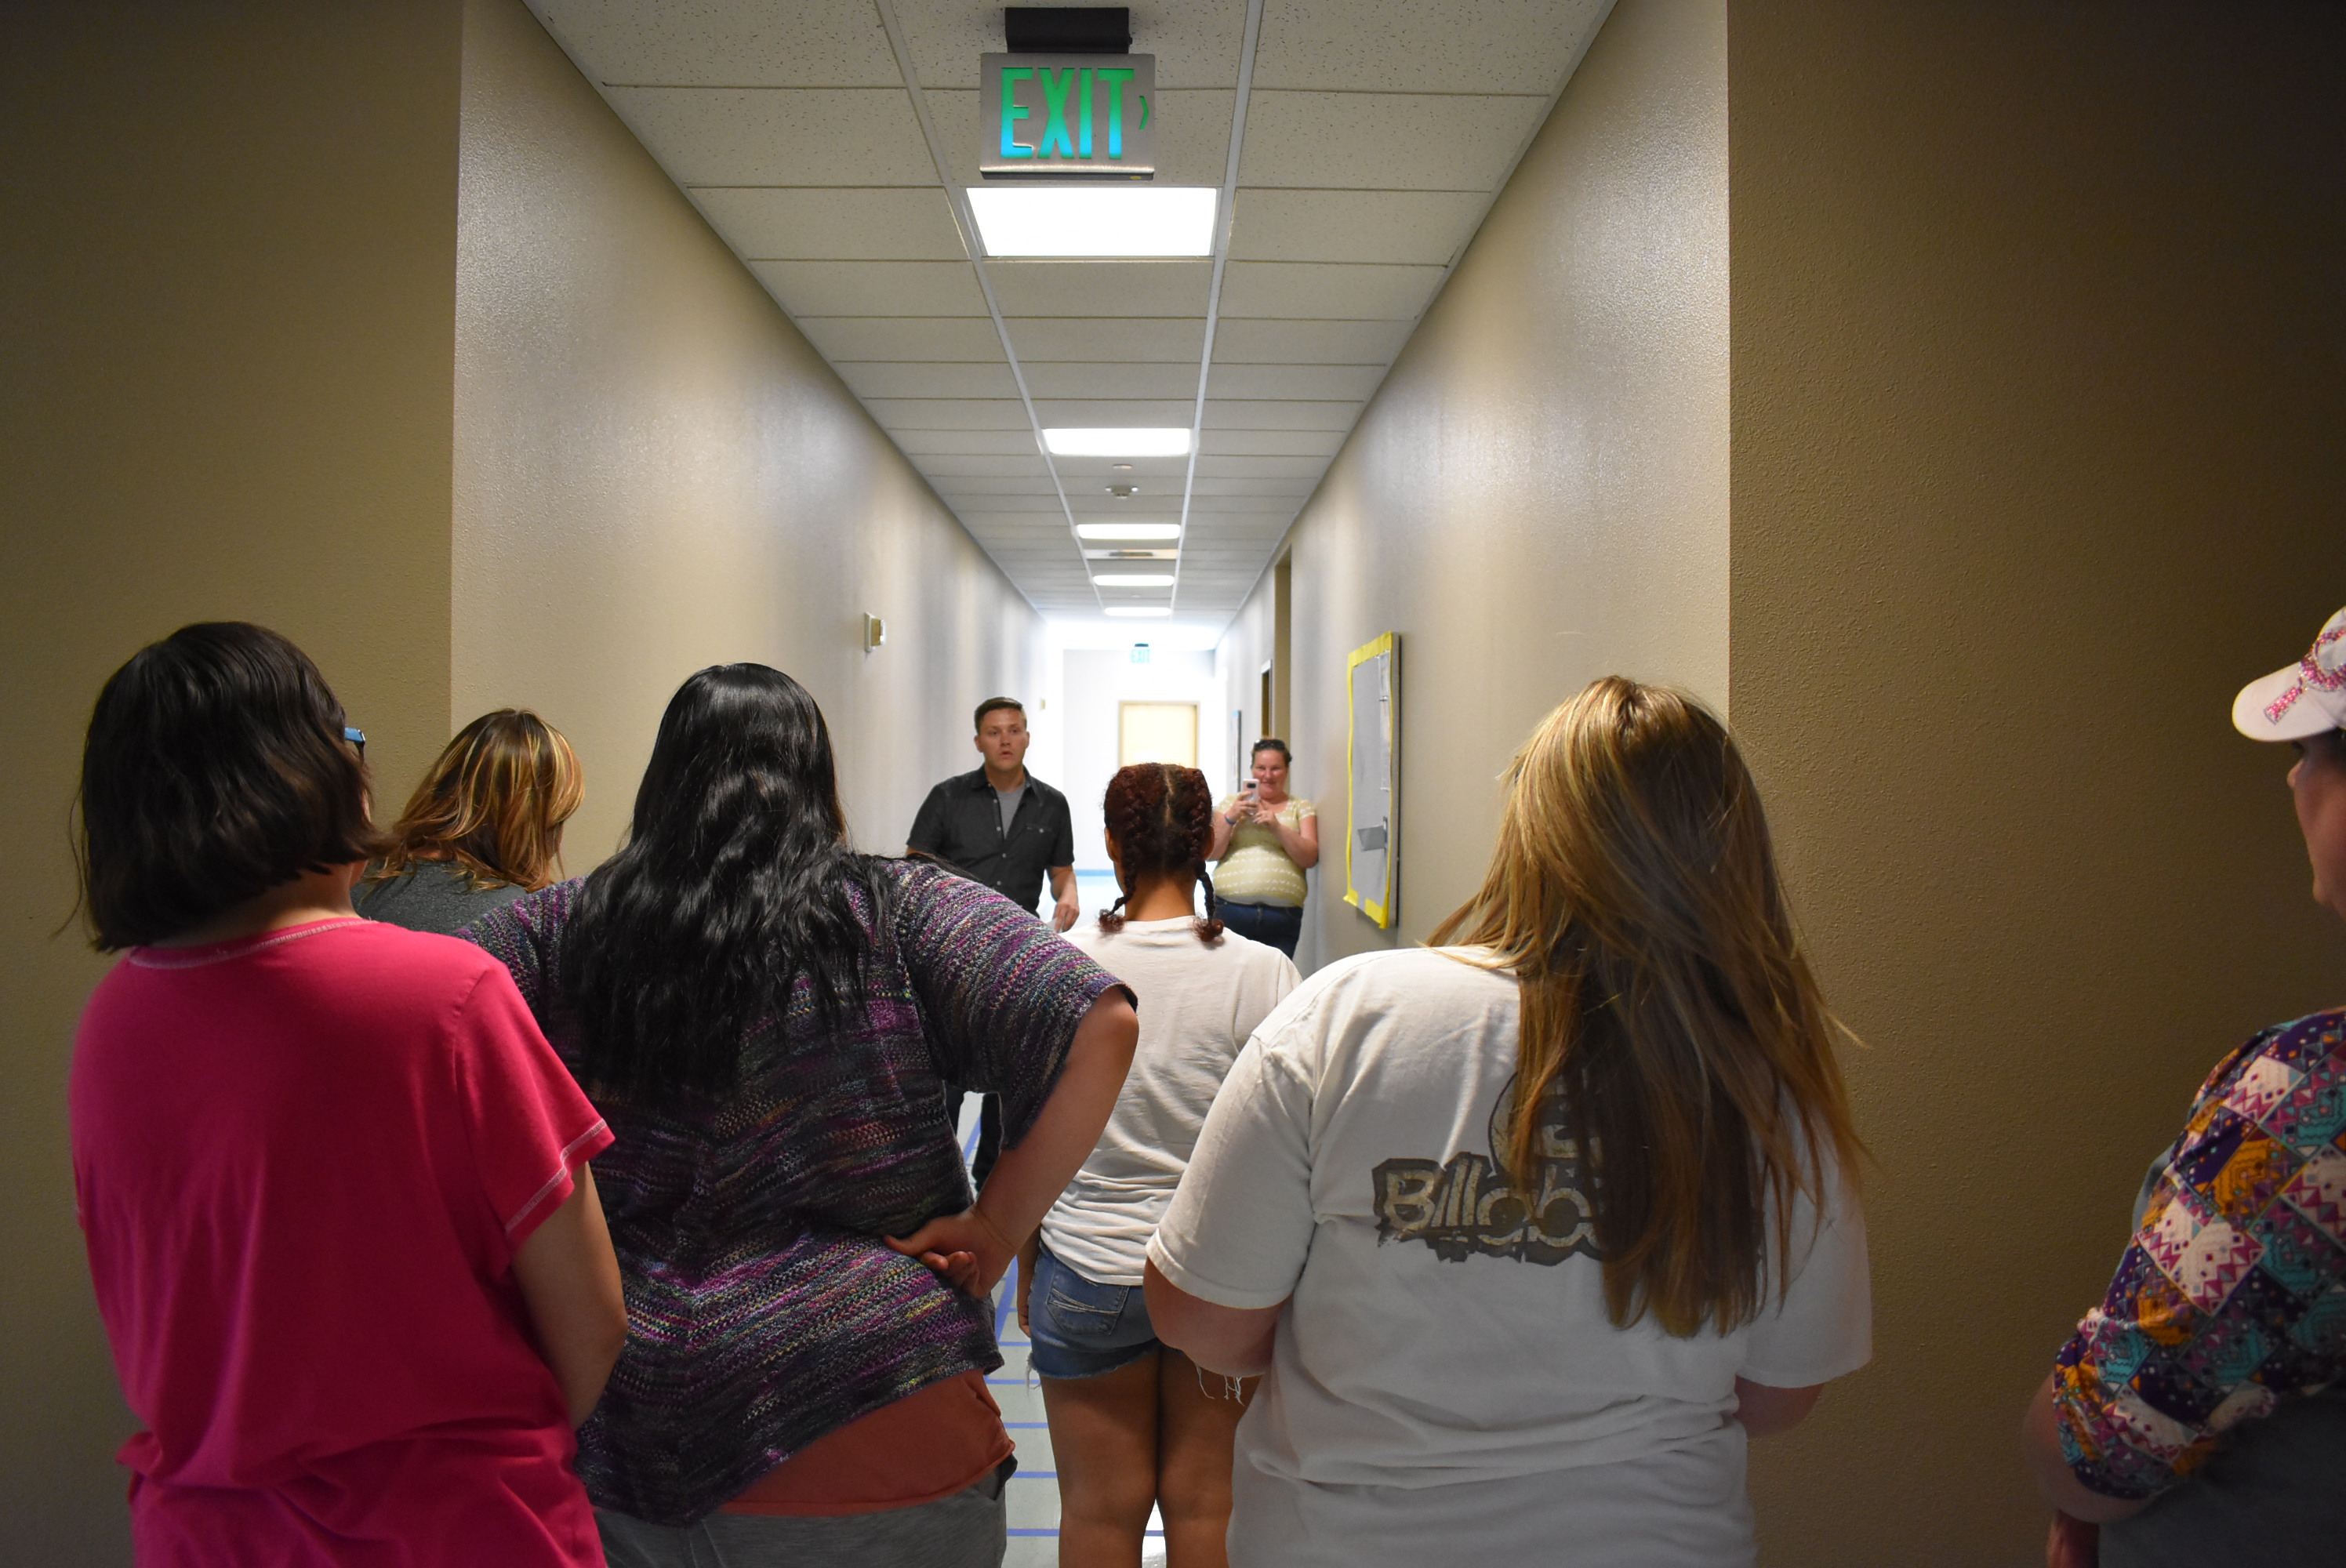 A group stands in a hallway with their backs to the camera. A man addresses this group while a woman in the background records him with her phone camera.